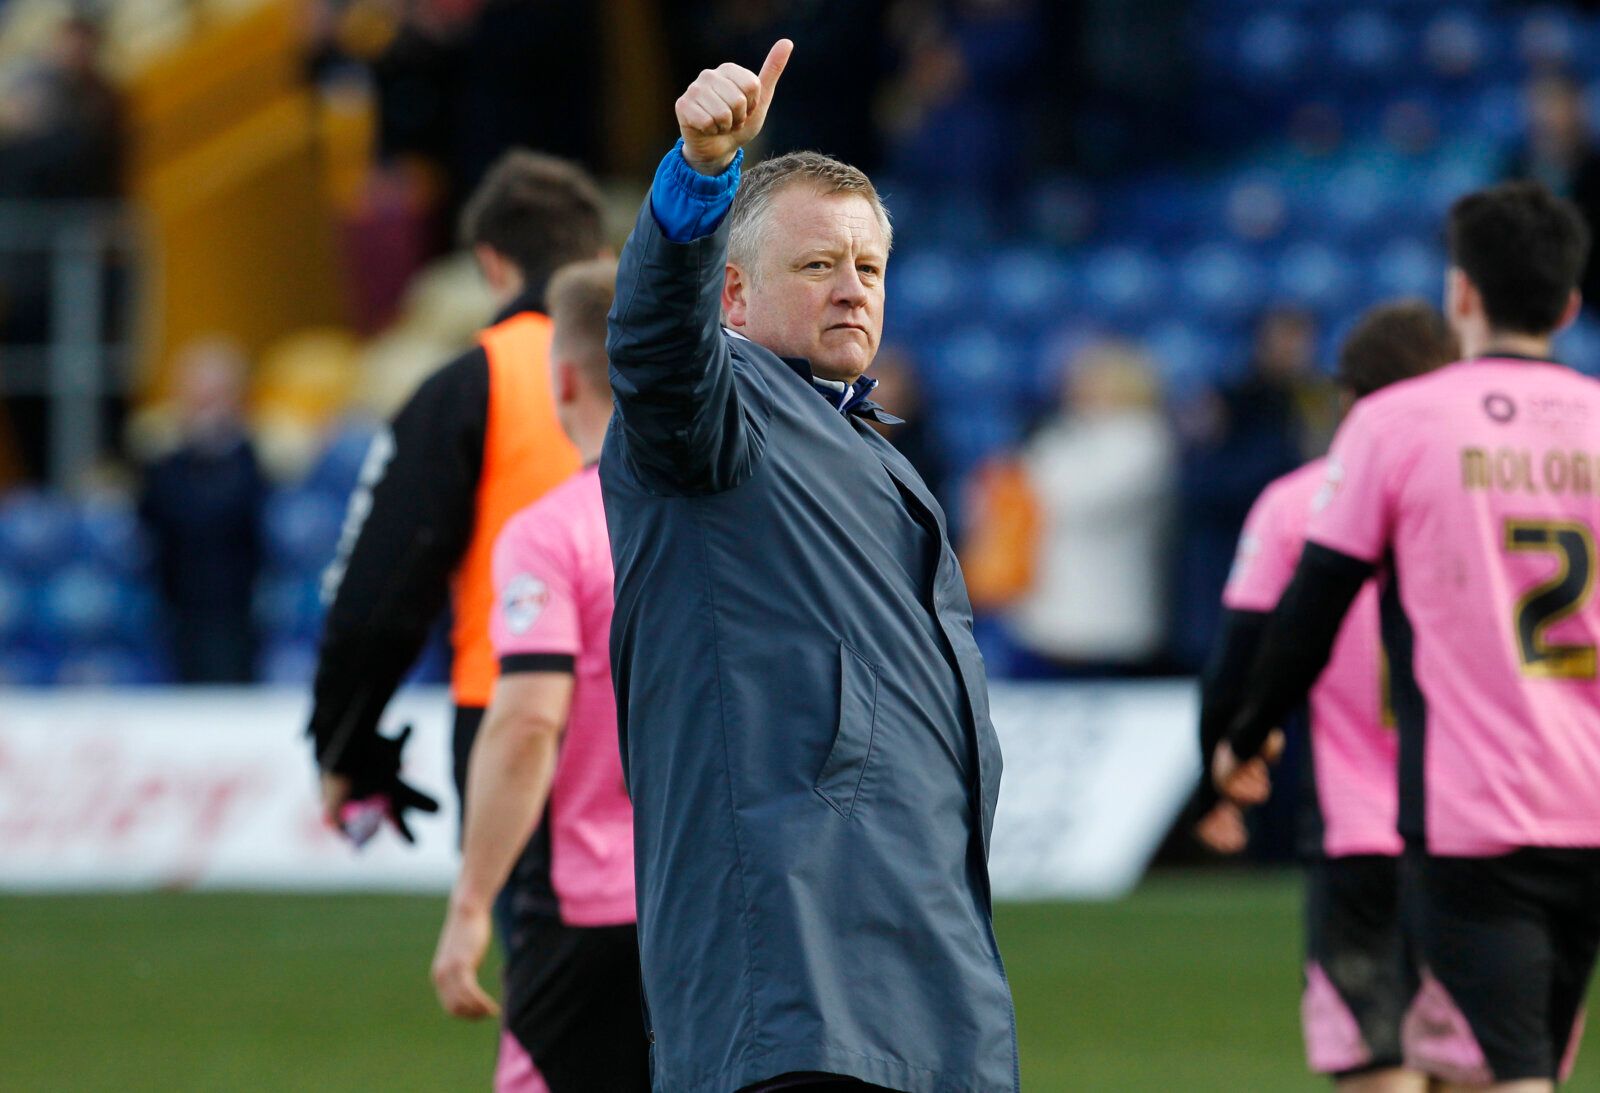 Football Soccer - Mansfield Town v Northampton Town - Sky Bet Football League Two - One Call Stadium - 28/3/16 
Northampton Town manager Chris Wilder acknowledges the fans after the final whistle 
Mandatory Credit: Action Images / Craig Brough 
Livepic 
EDITORIAL USE ONLY. No use with unauthorized audio, video, data, fixture lists, club/league logos or 